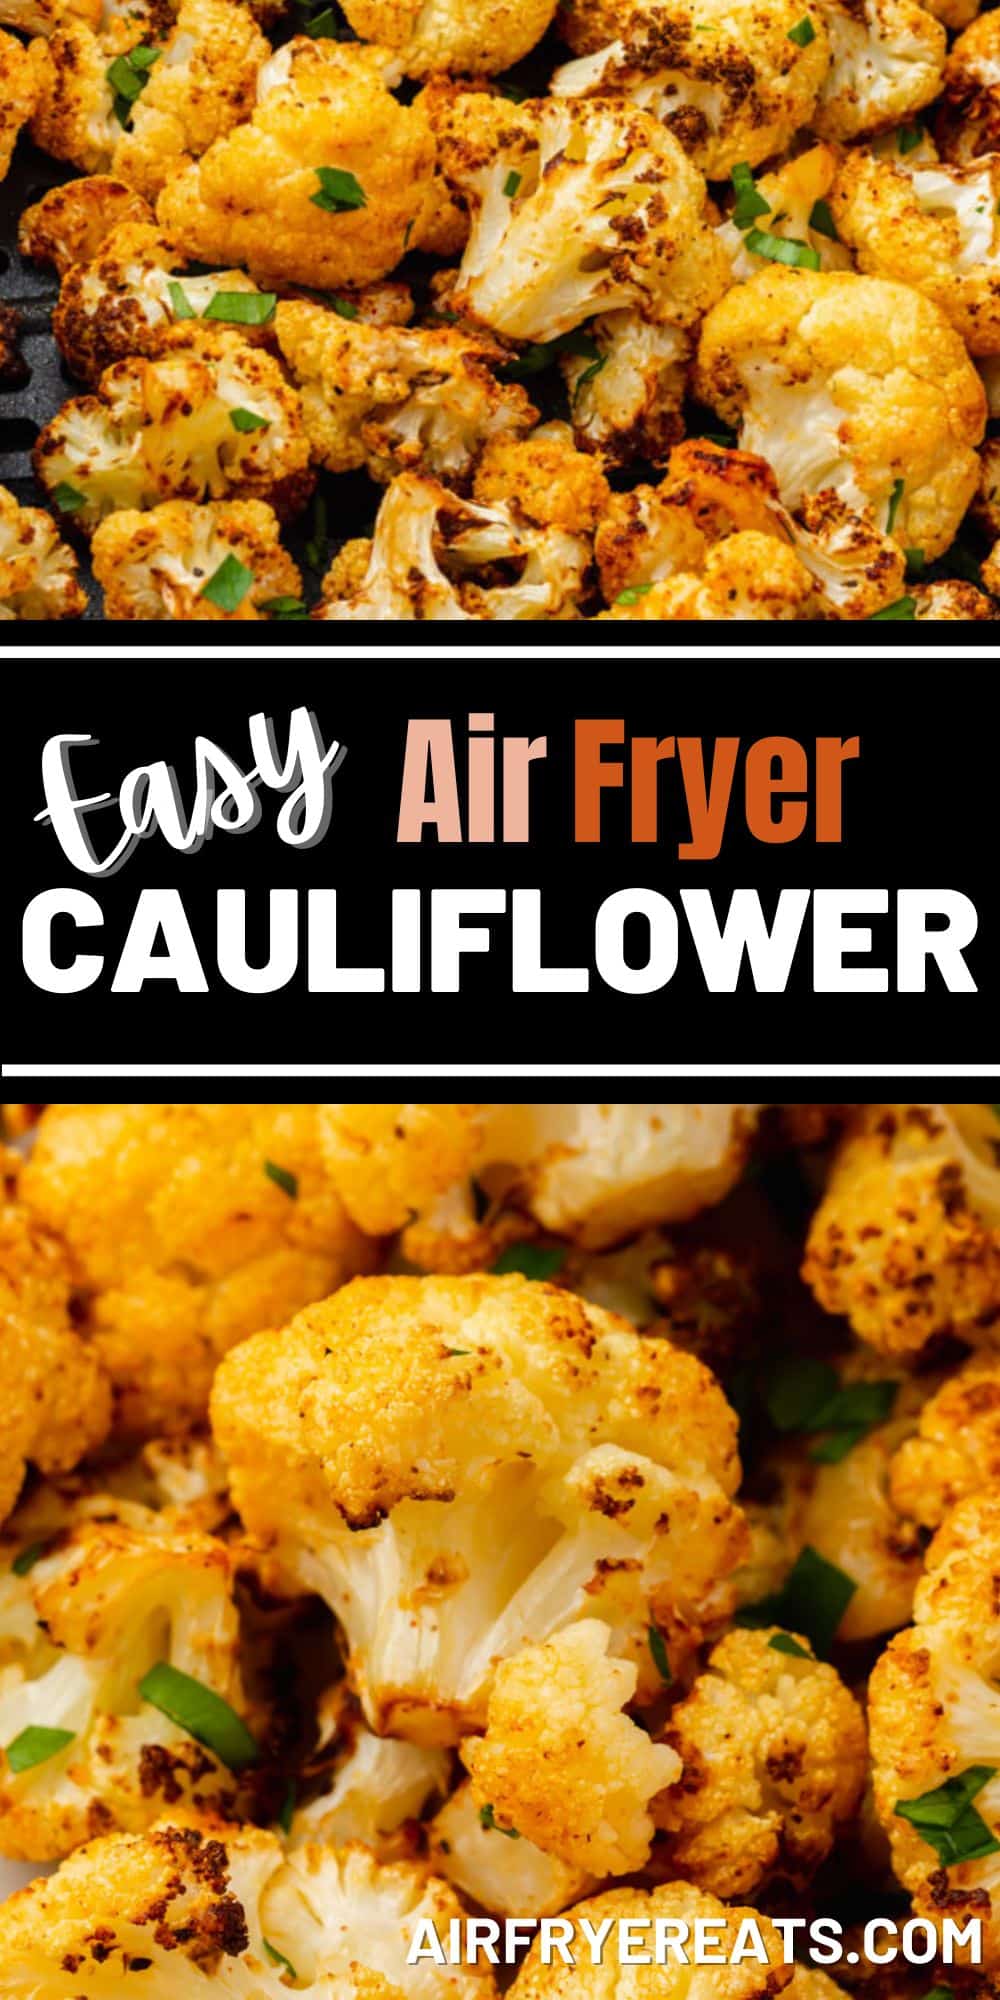 Air Fryer Cauliflower is a healthy and delicious side dish that is easy and quick to make! Just toss florets with oil and seasonings, and air fry until they're golden brown and roasted to perfection. via @vegetarianmamma